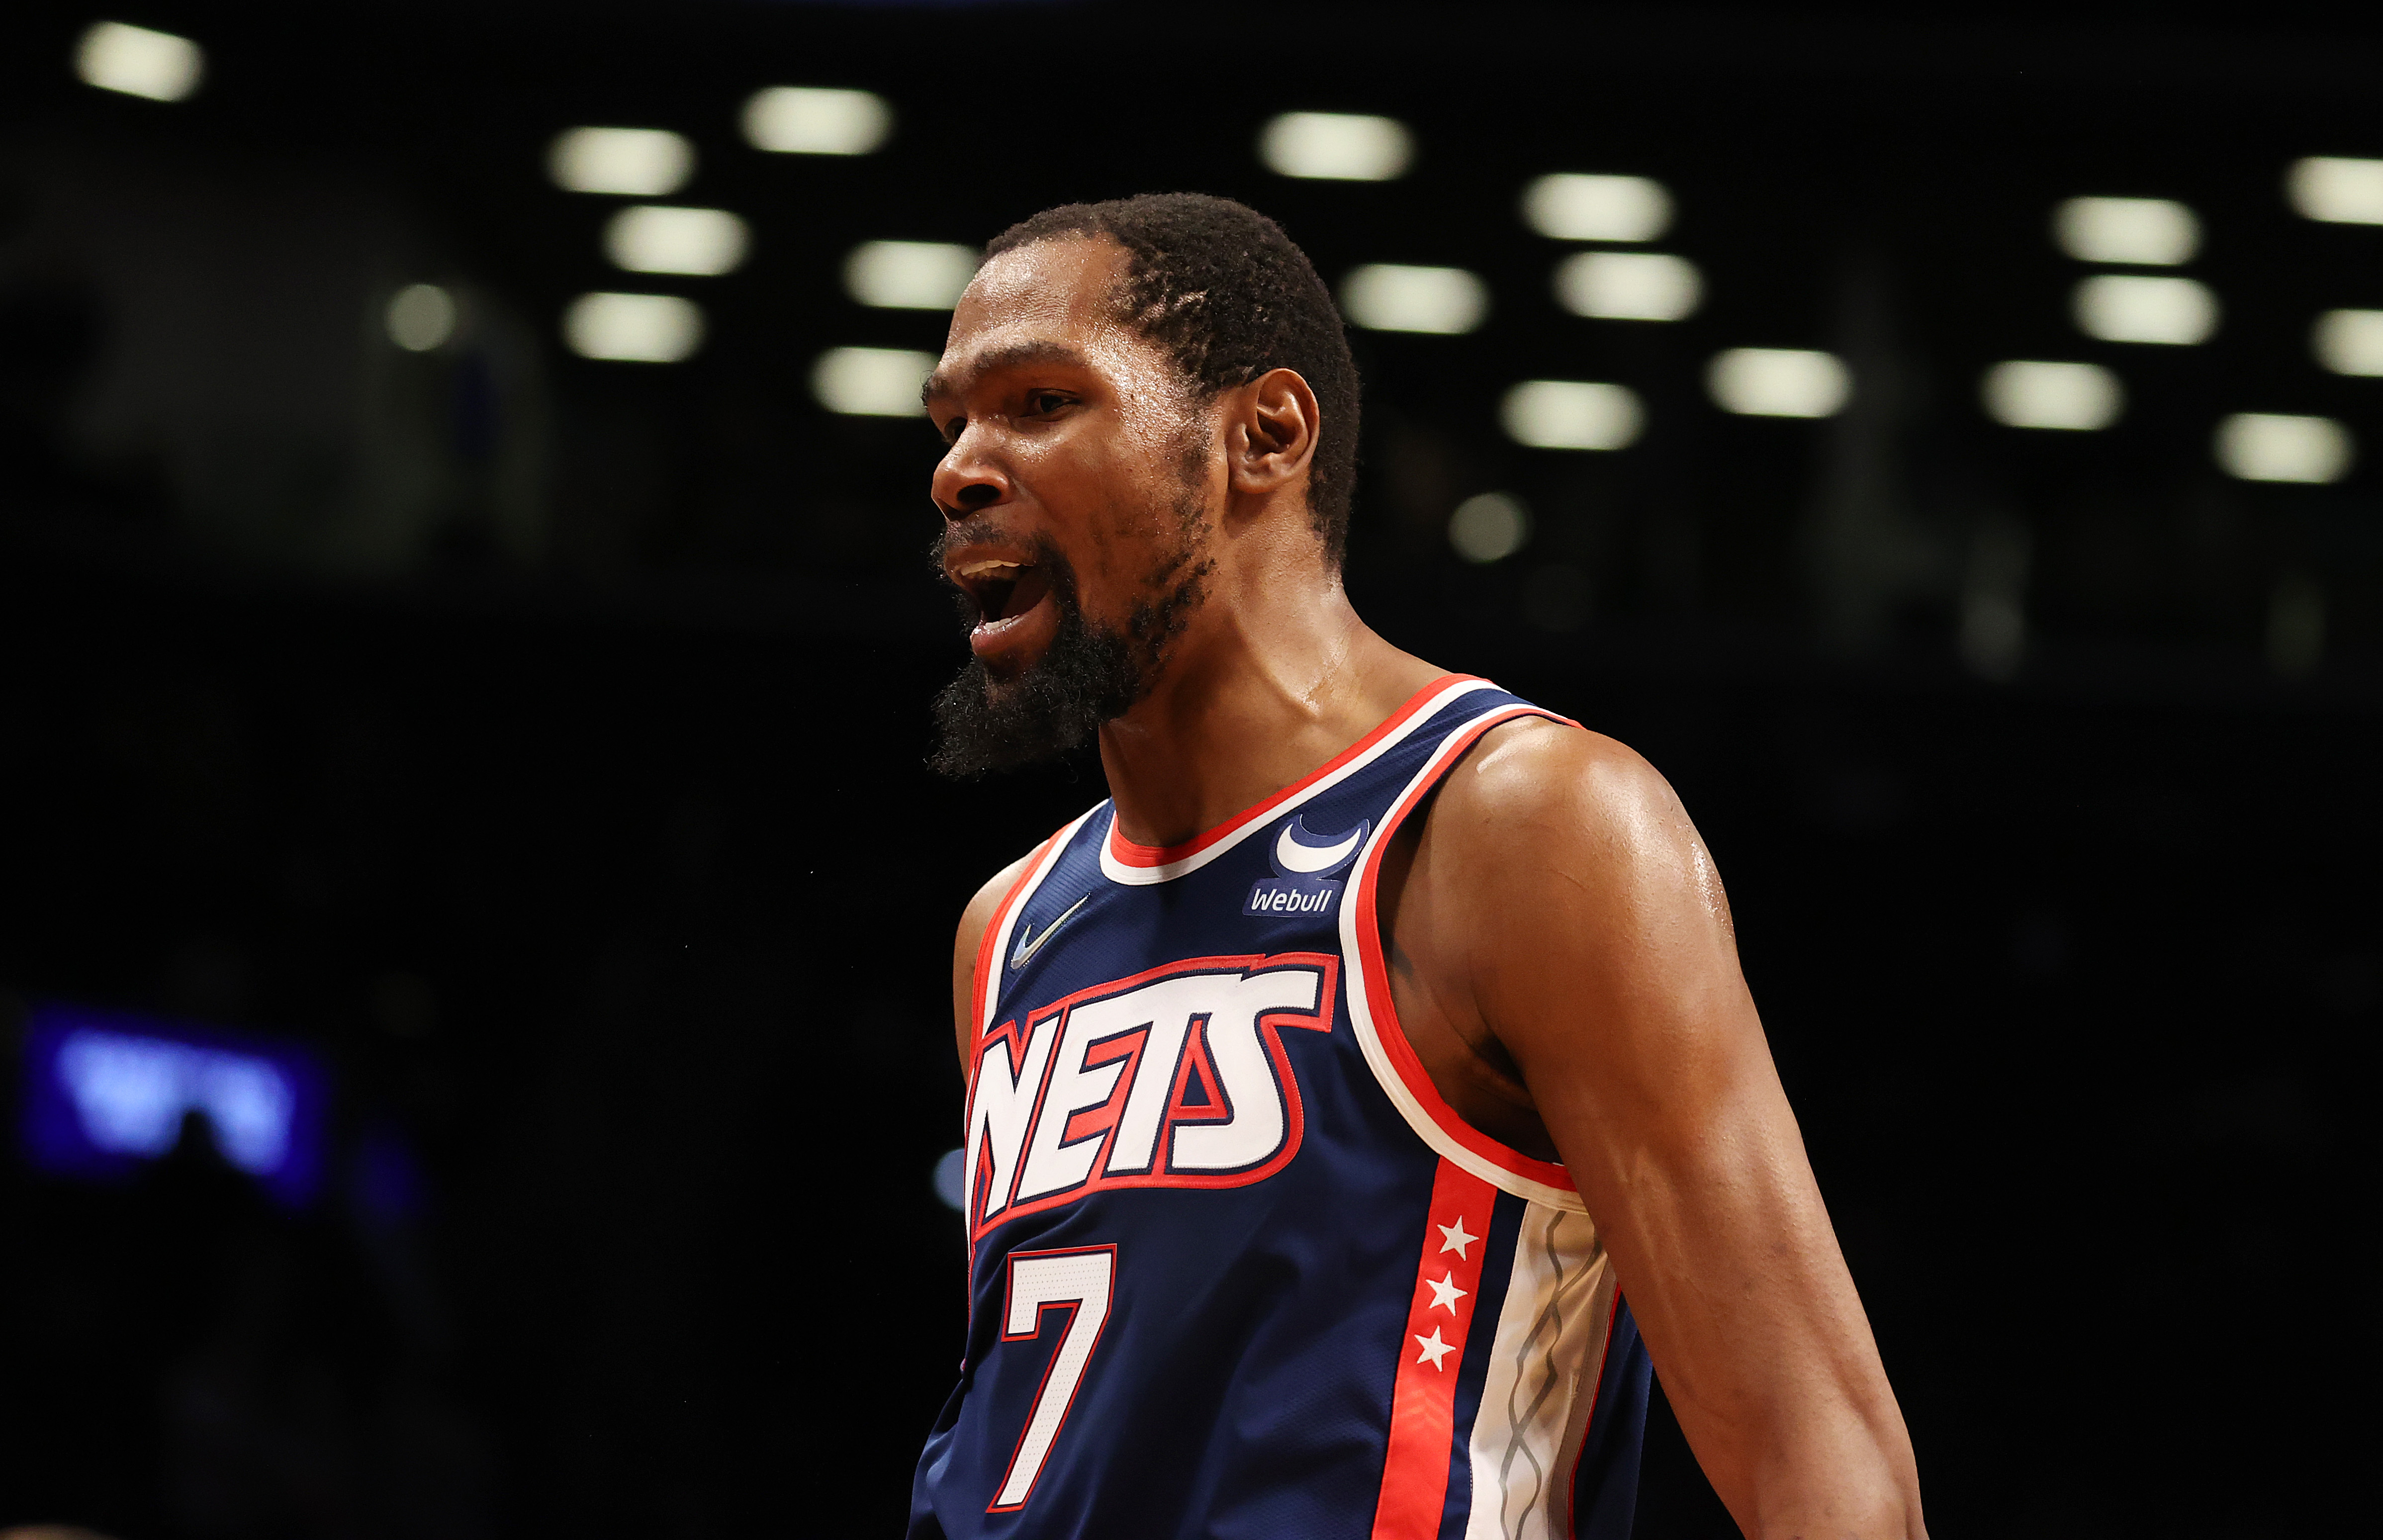 Brooklyn Nets star Kevin Durant reacts during a game against the Philadelphia 76ers